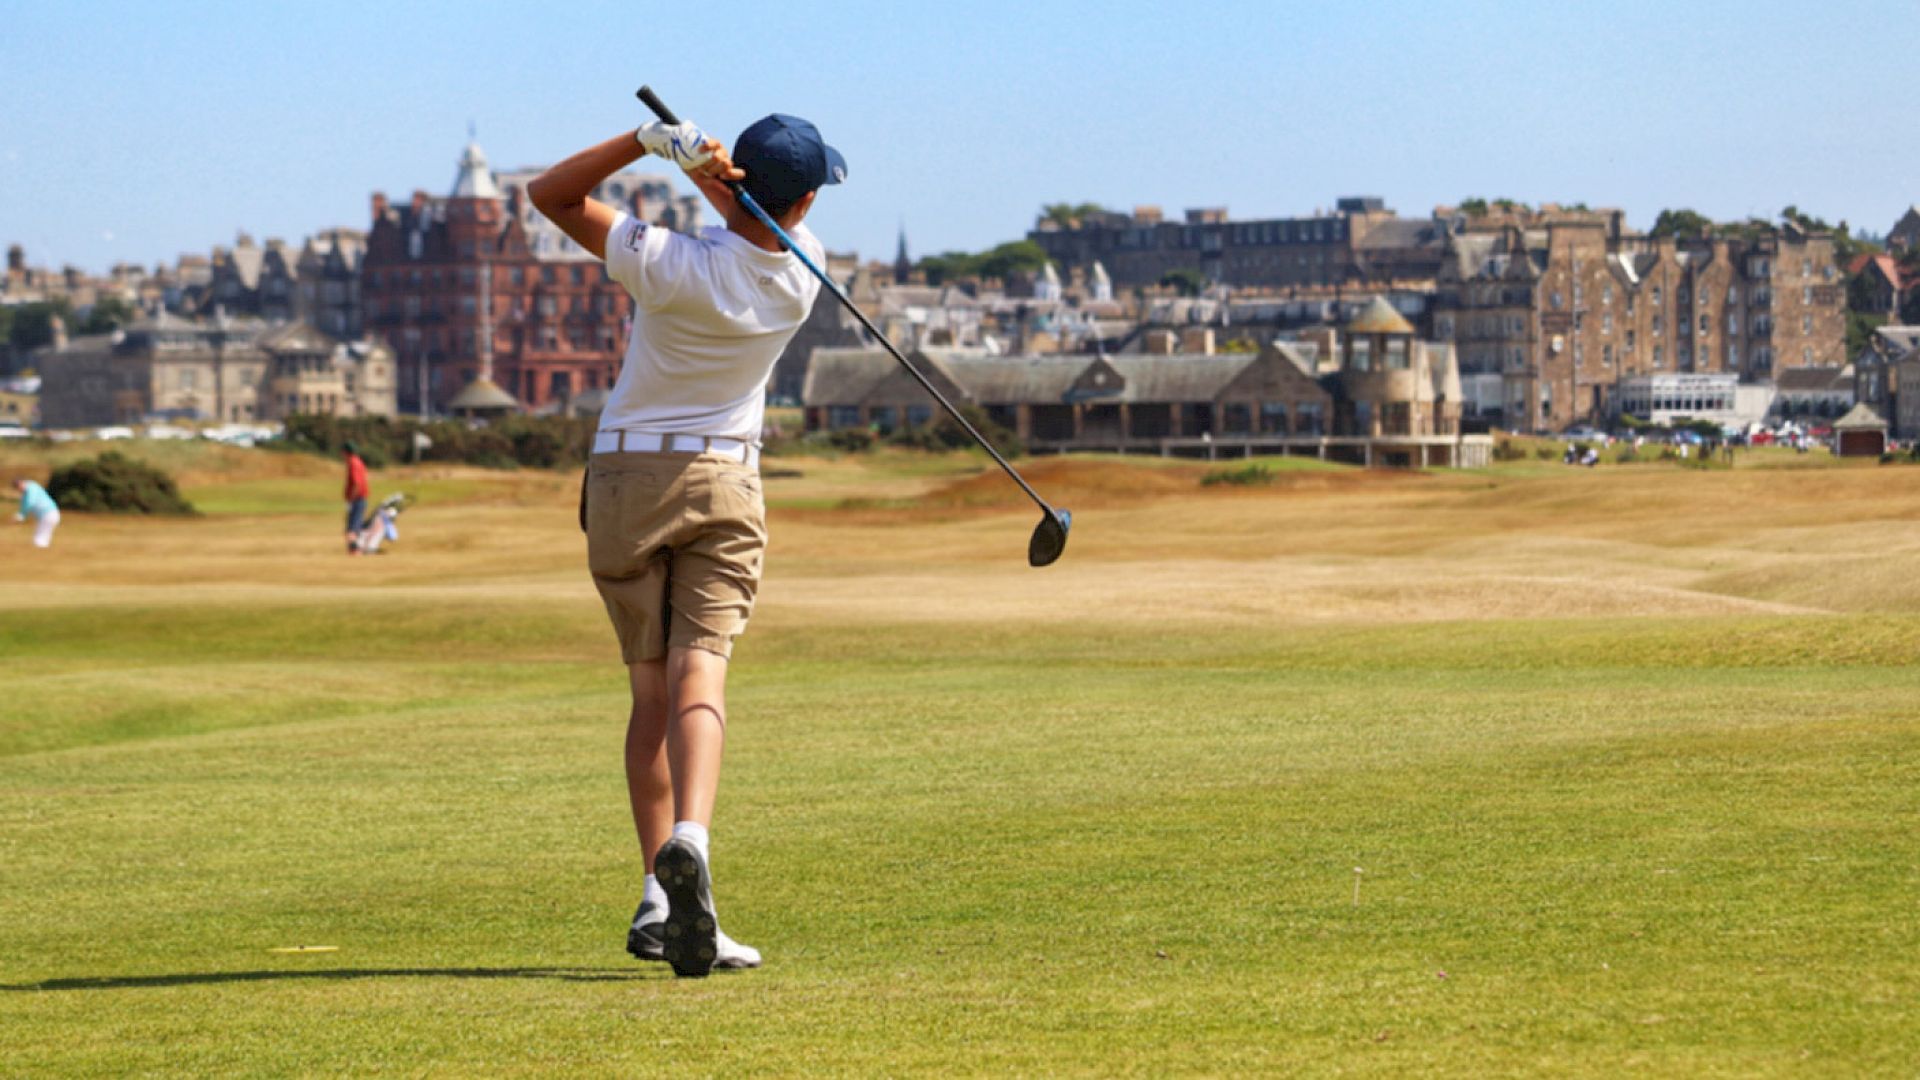 ISSFT student playing golf at St. Andrews